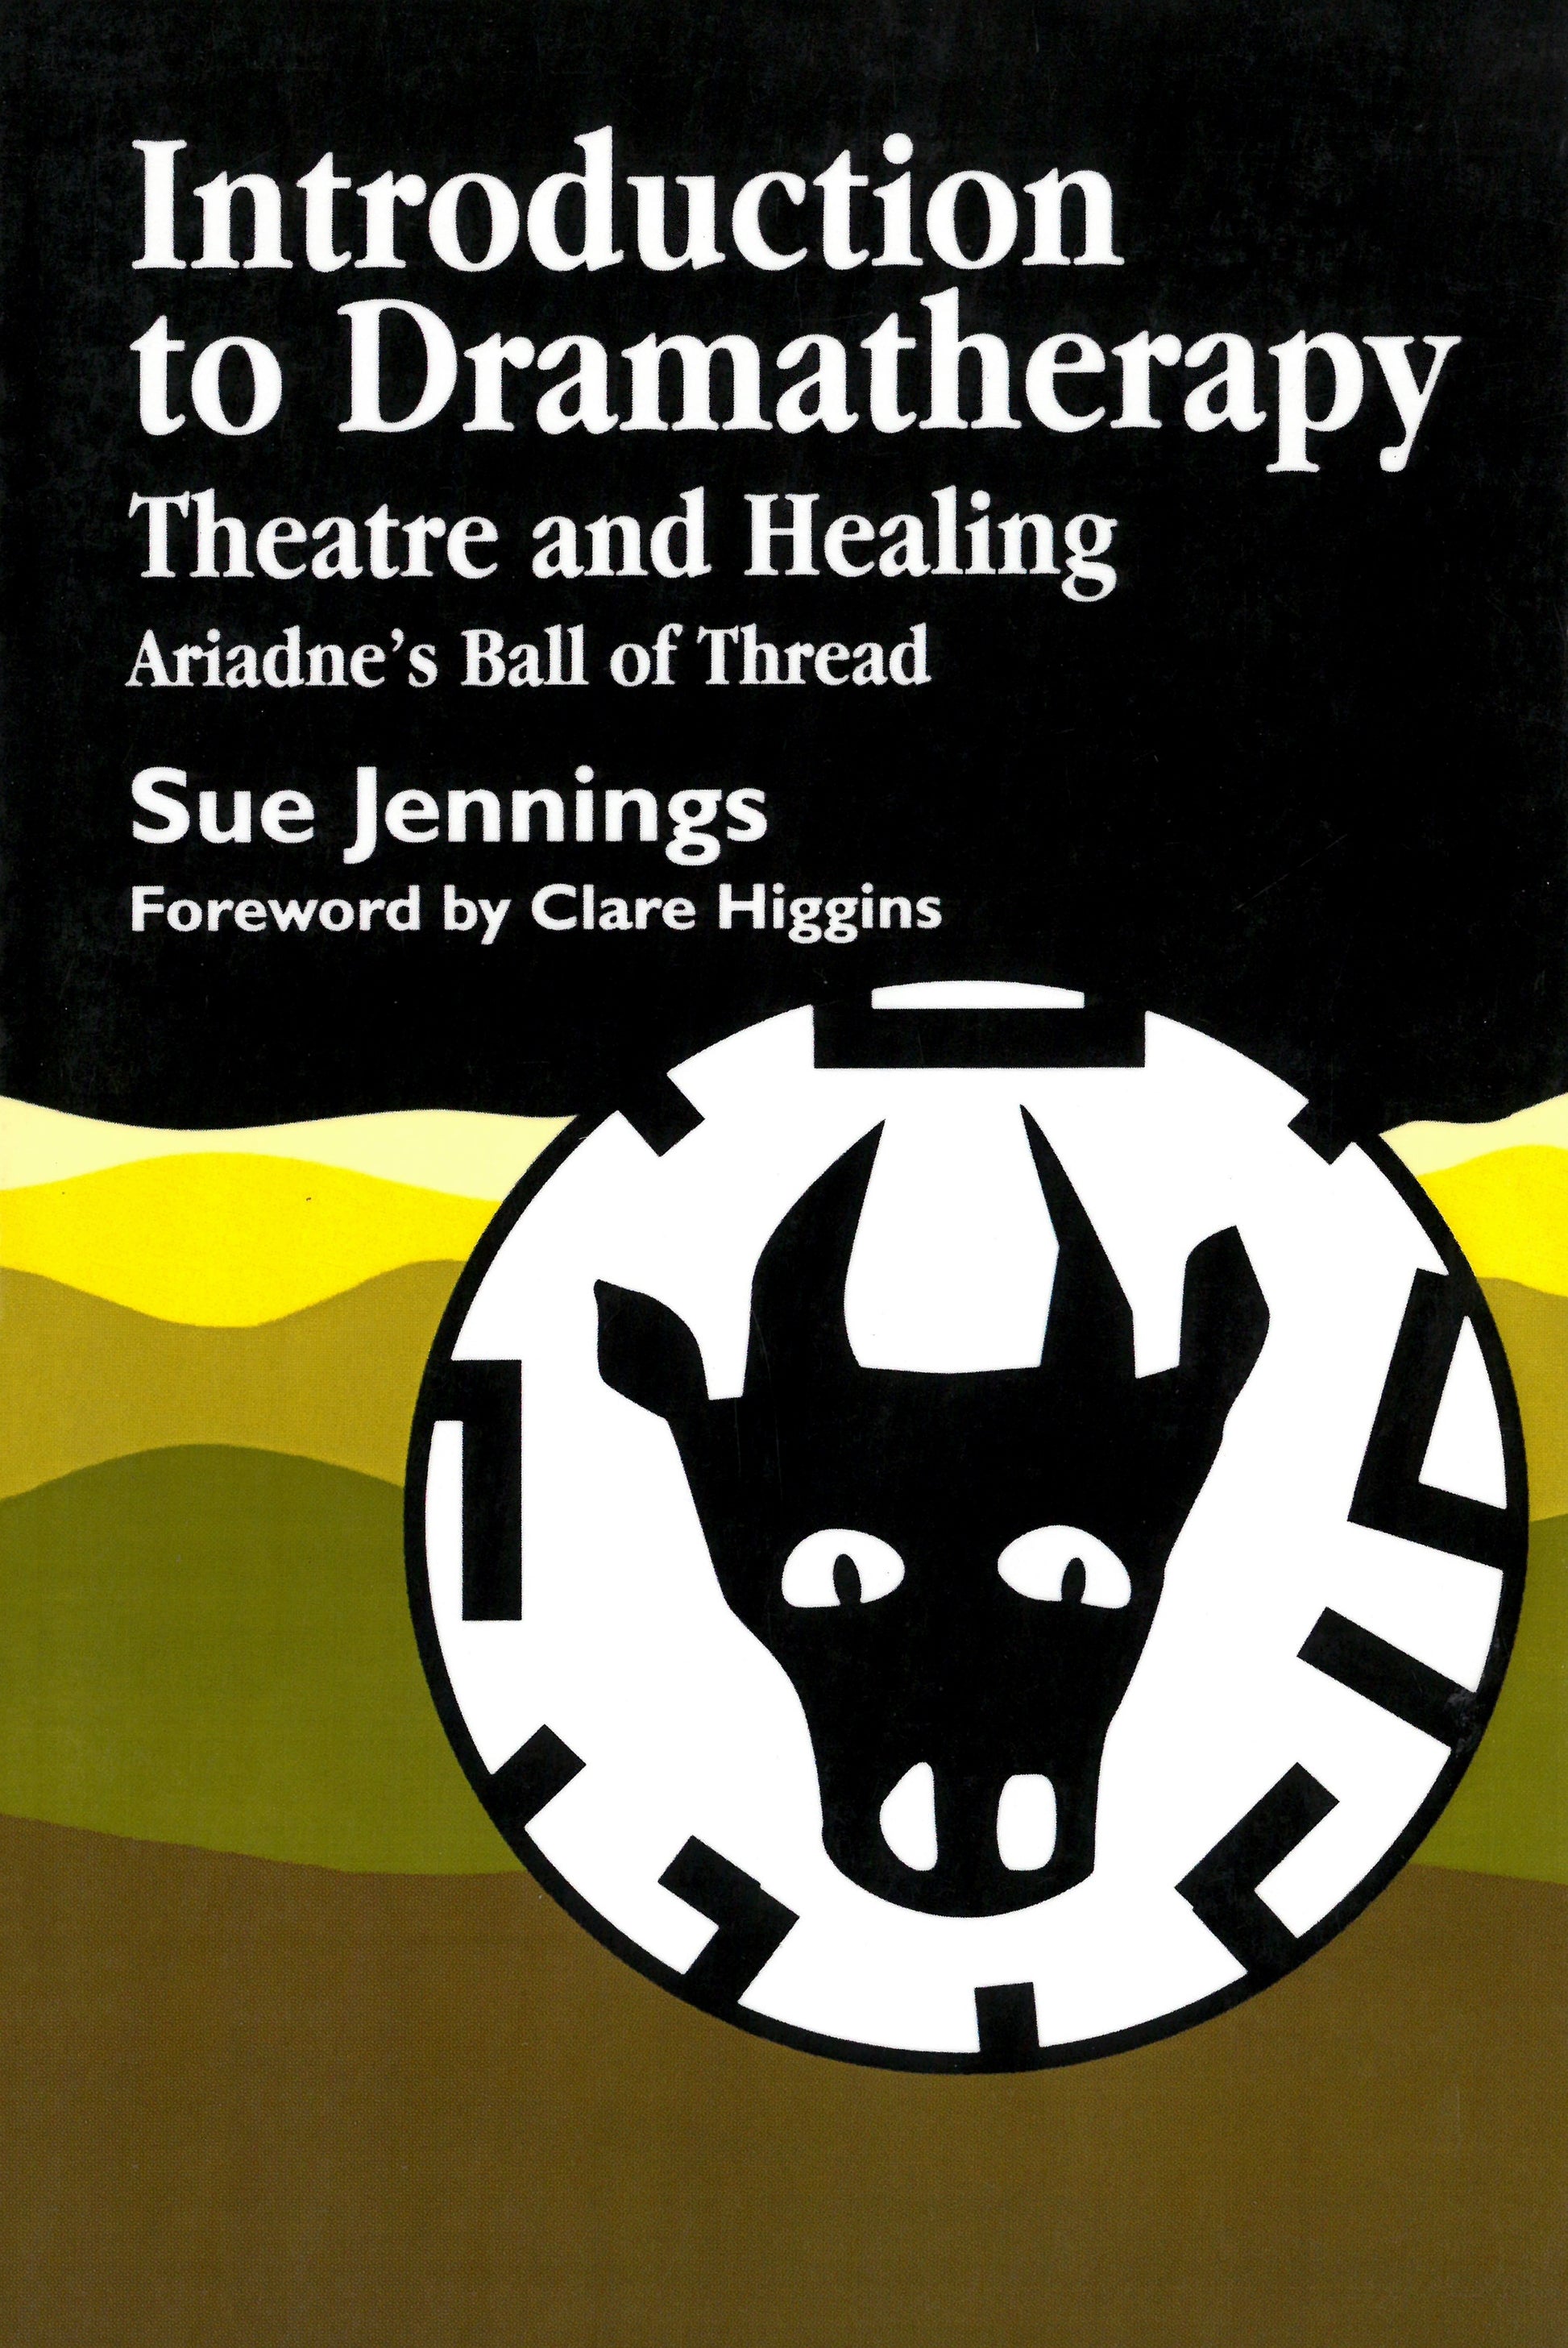 Introduction to Dramatherapy by Sue Jennings